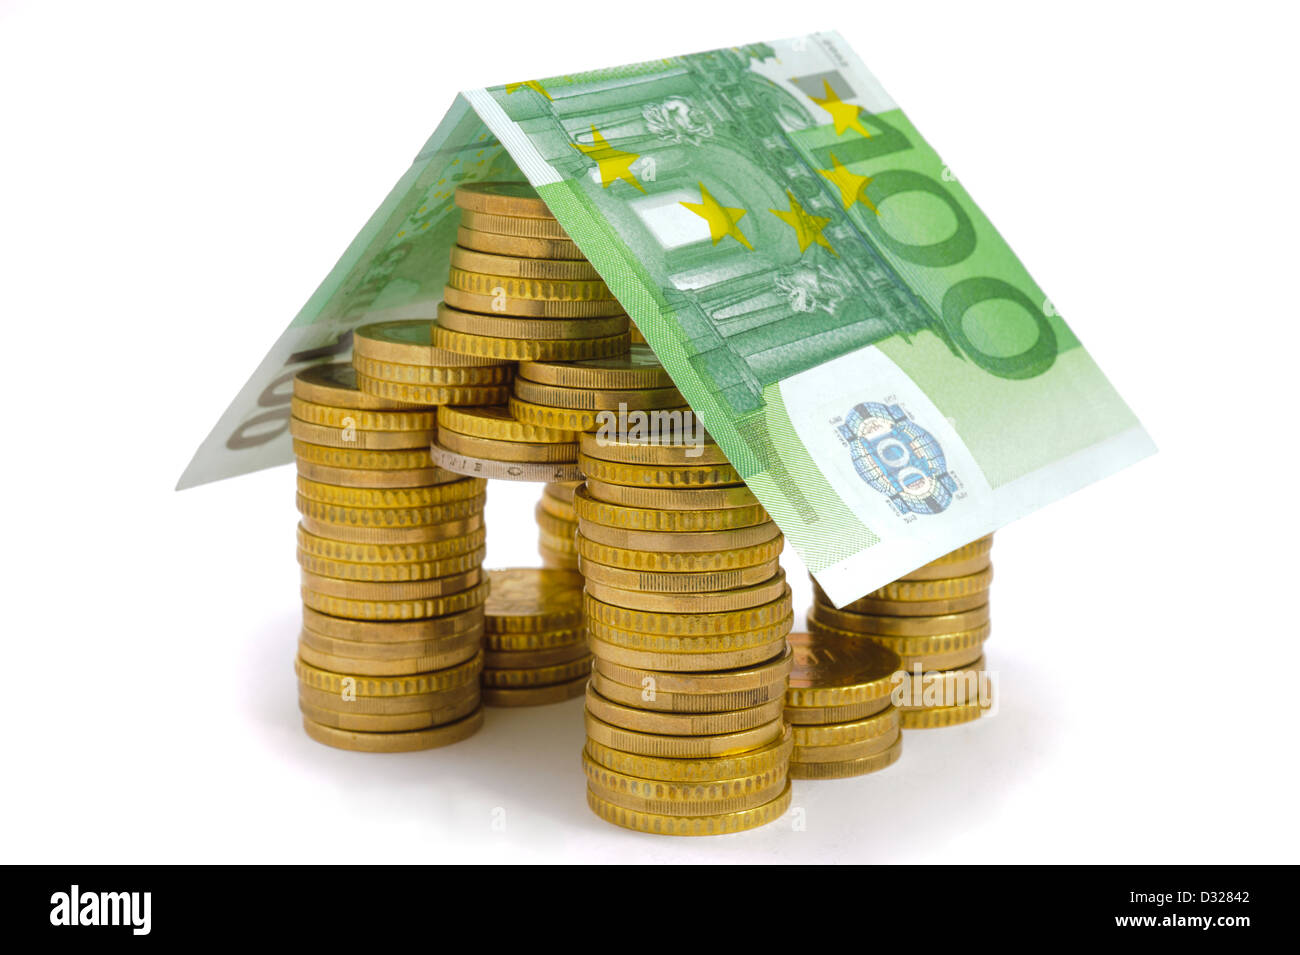 model house built with euro coins and banknote as symbol for finance or real estate Stock Photo